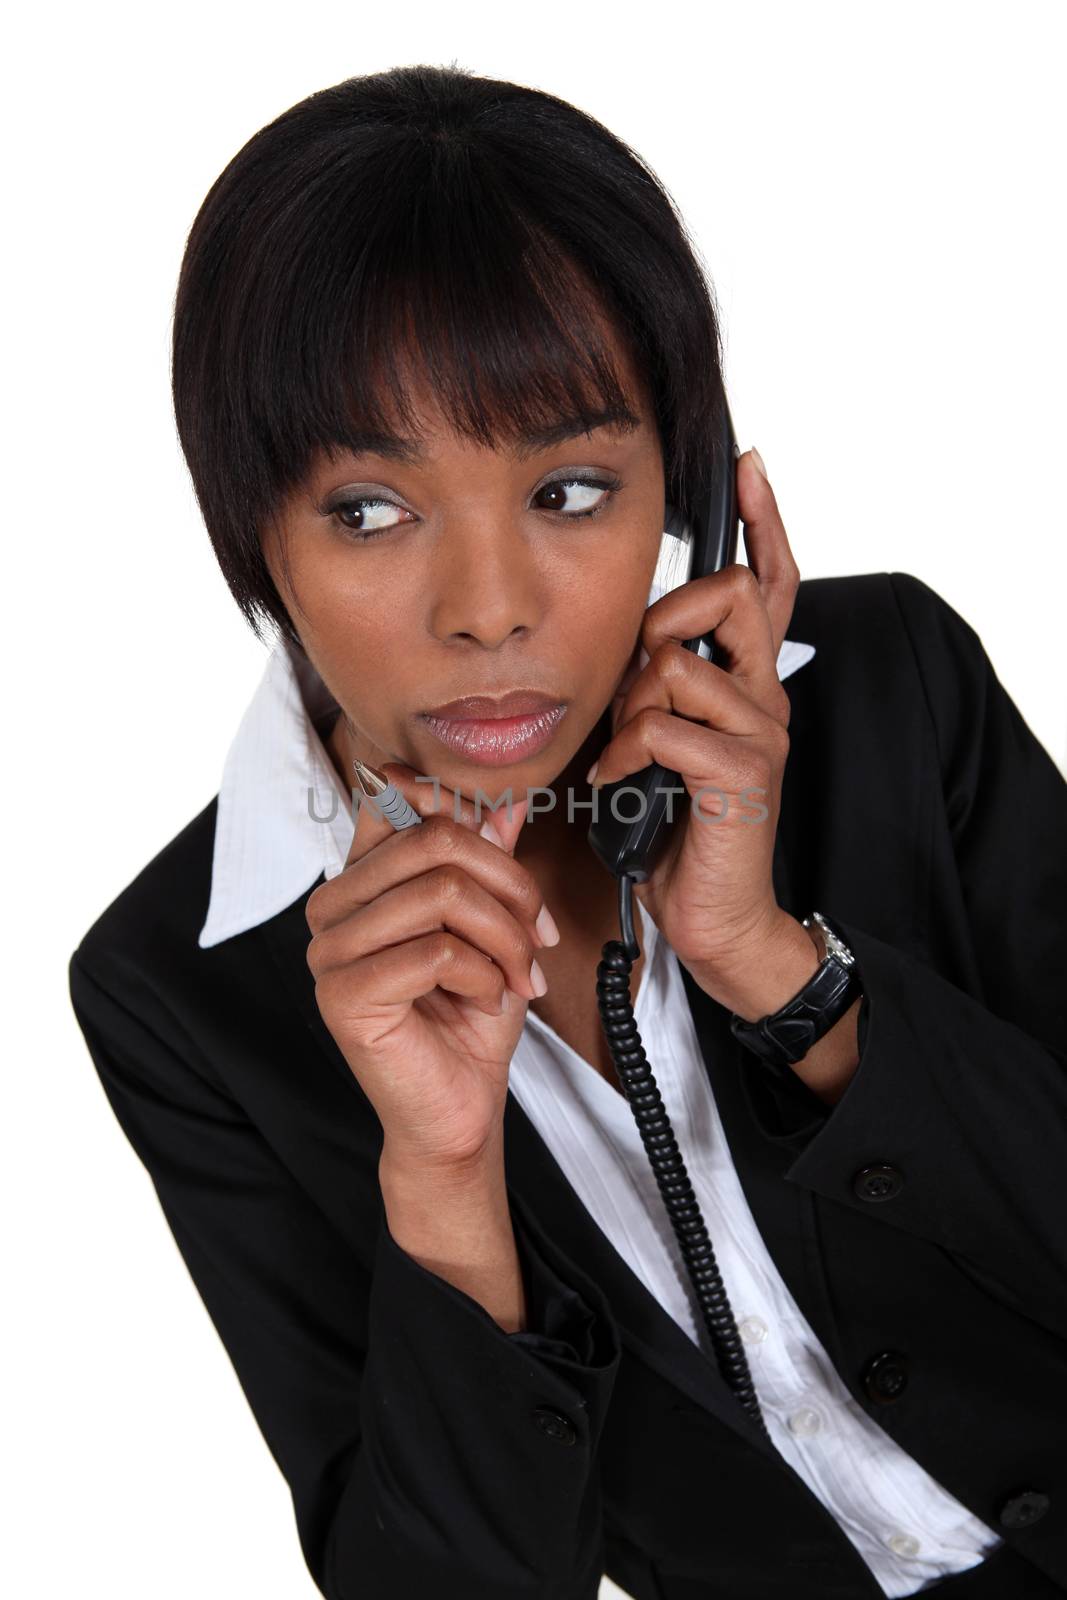 Woman paying attention during phone call by phovoir